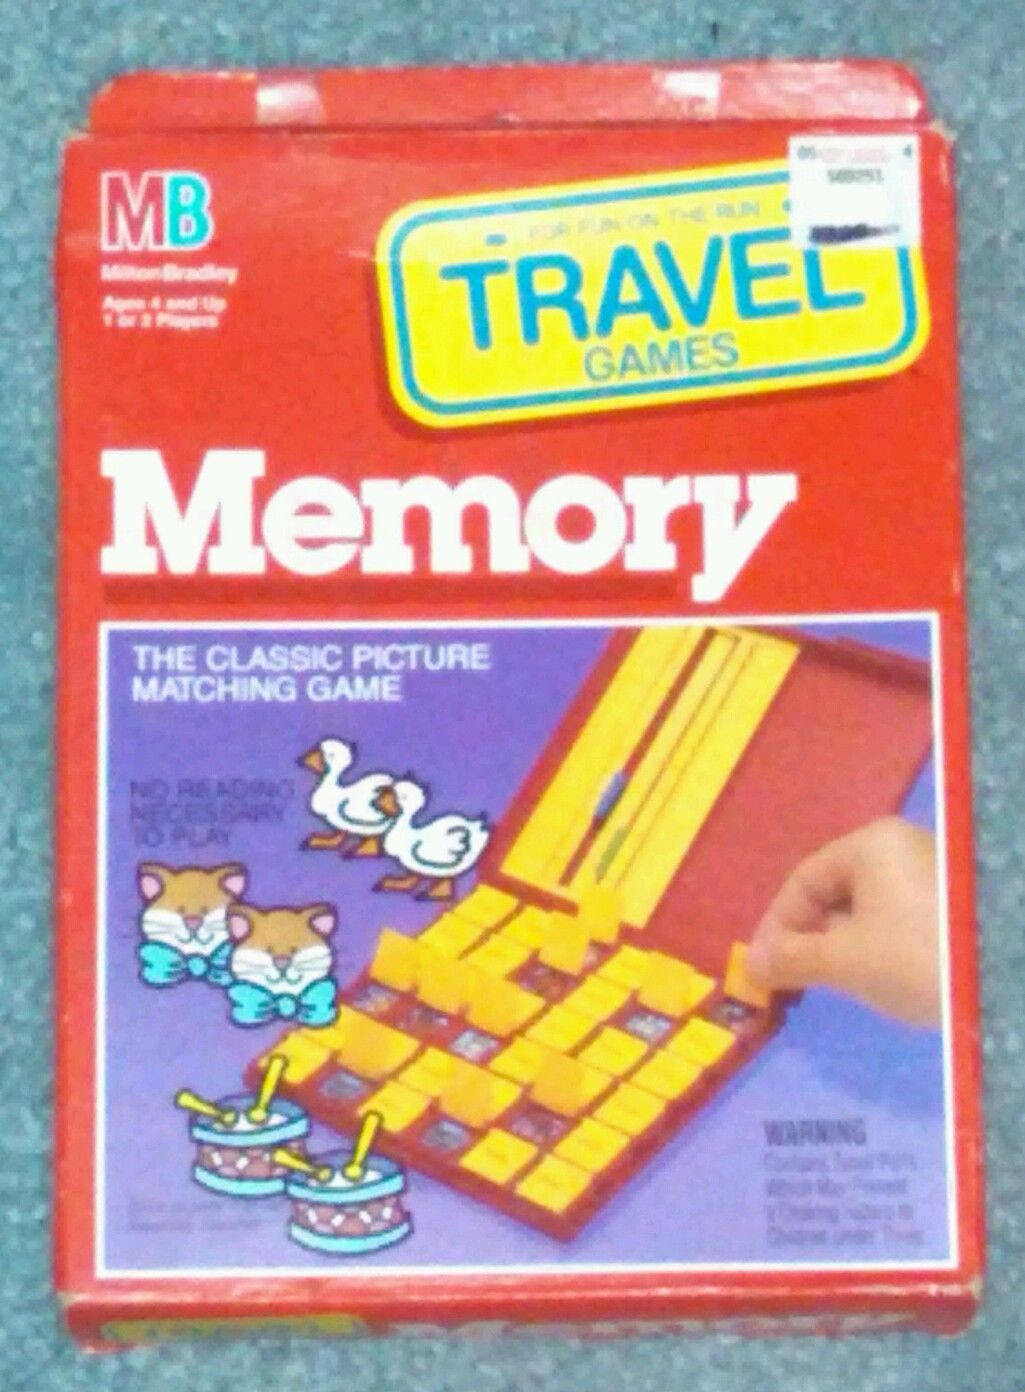 MEMORY GAME TRAVEL MEMORY PICTURE MATCHING GAME 1989 MILTON BRADLEY NEW COMPLETE - $8.00